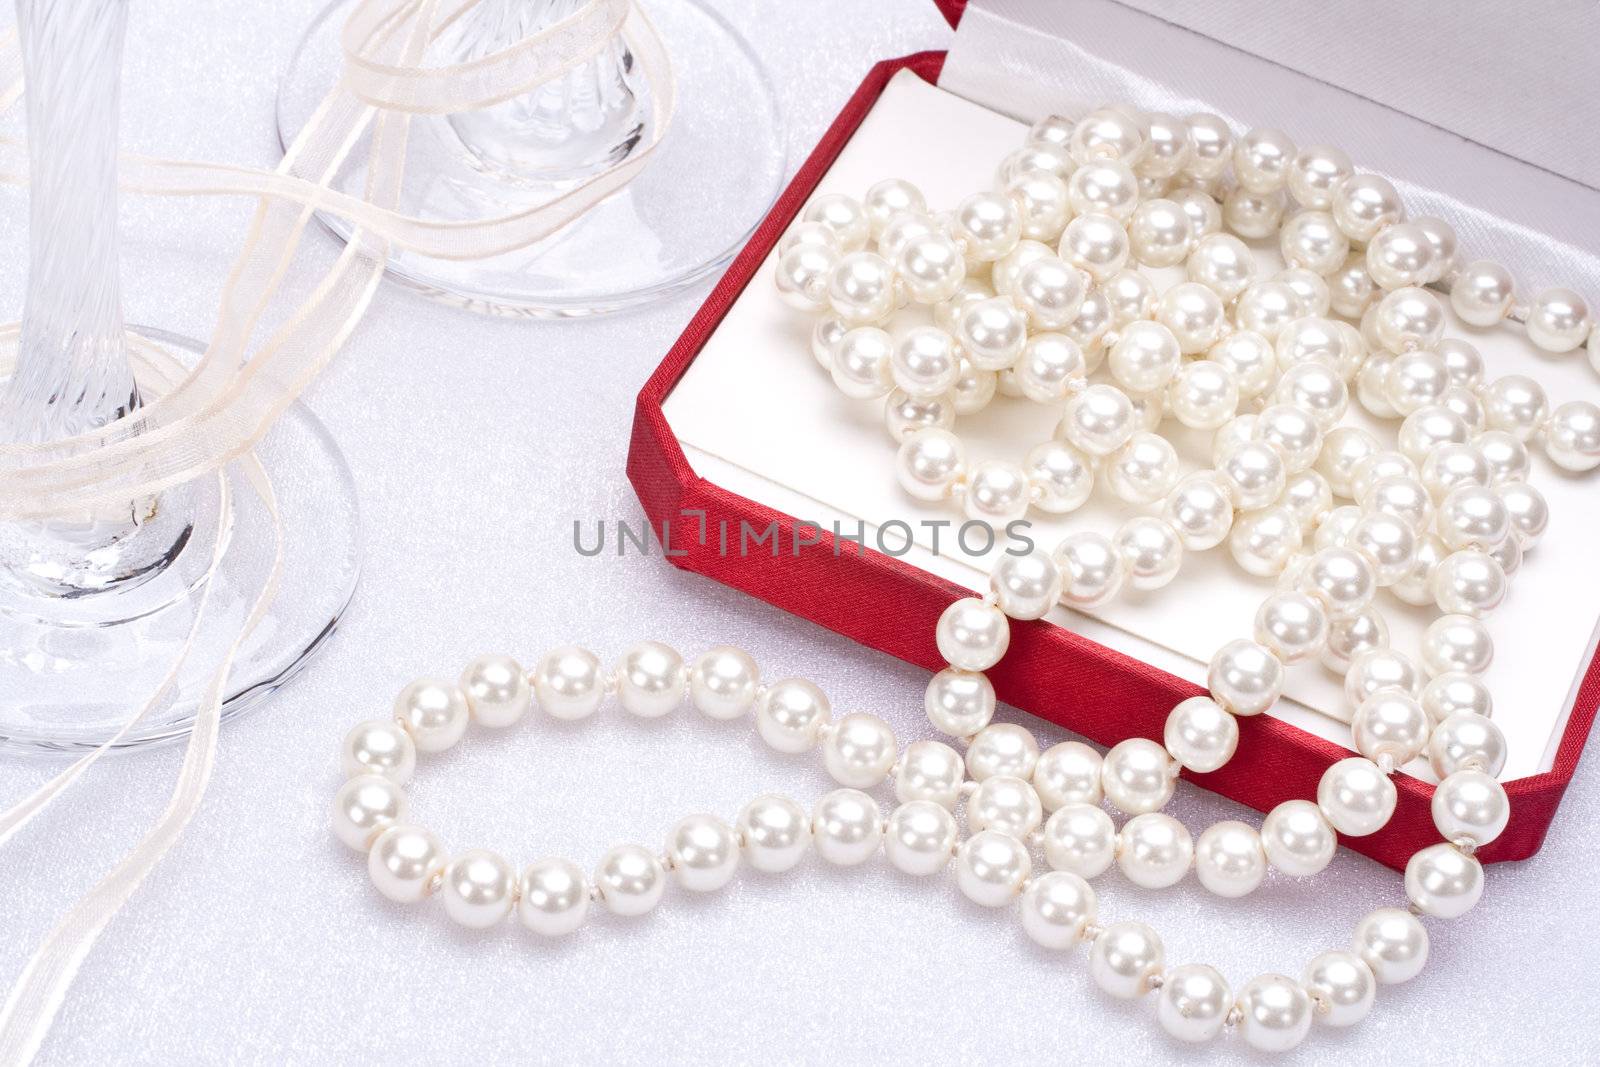 pearls in a red gift box with glasses